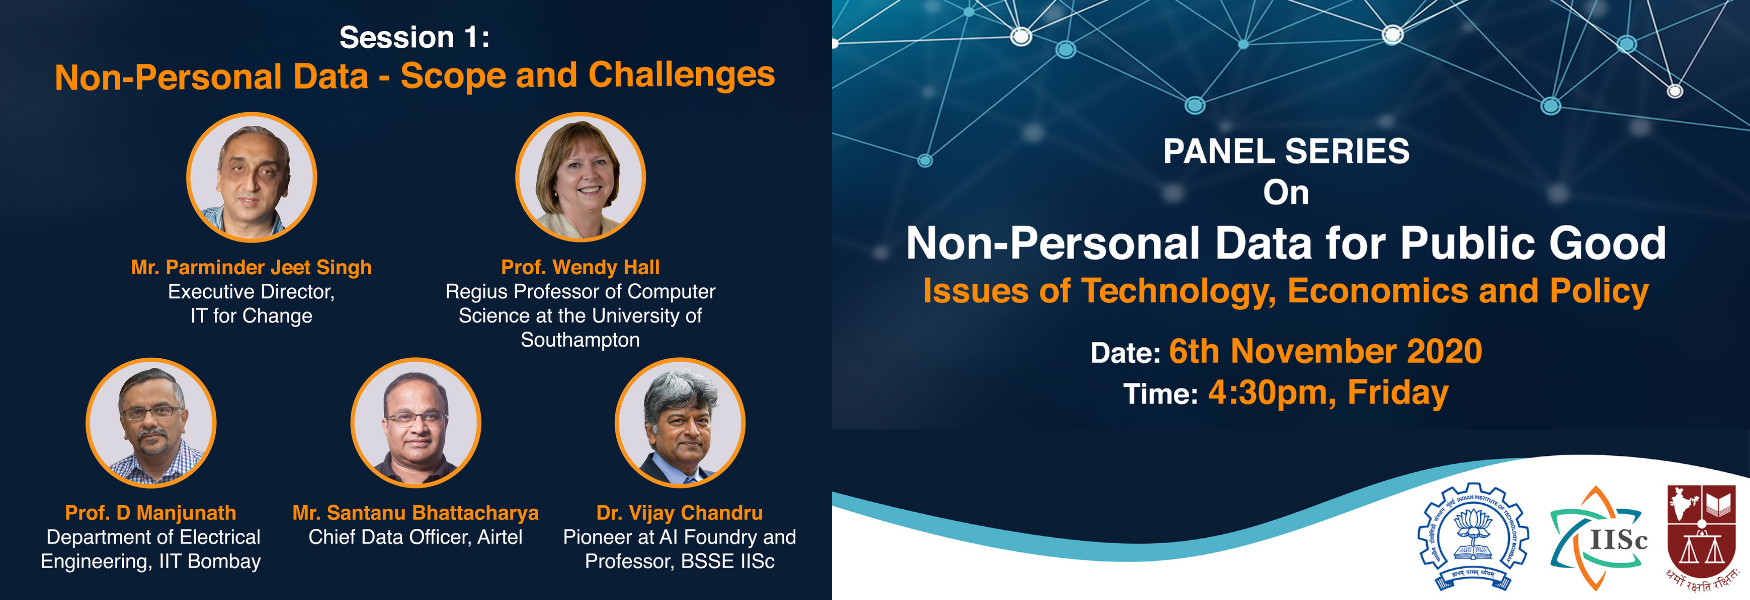 Non-Personal Data: Scope and Challenges